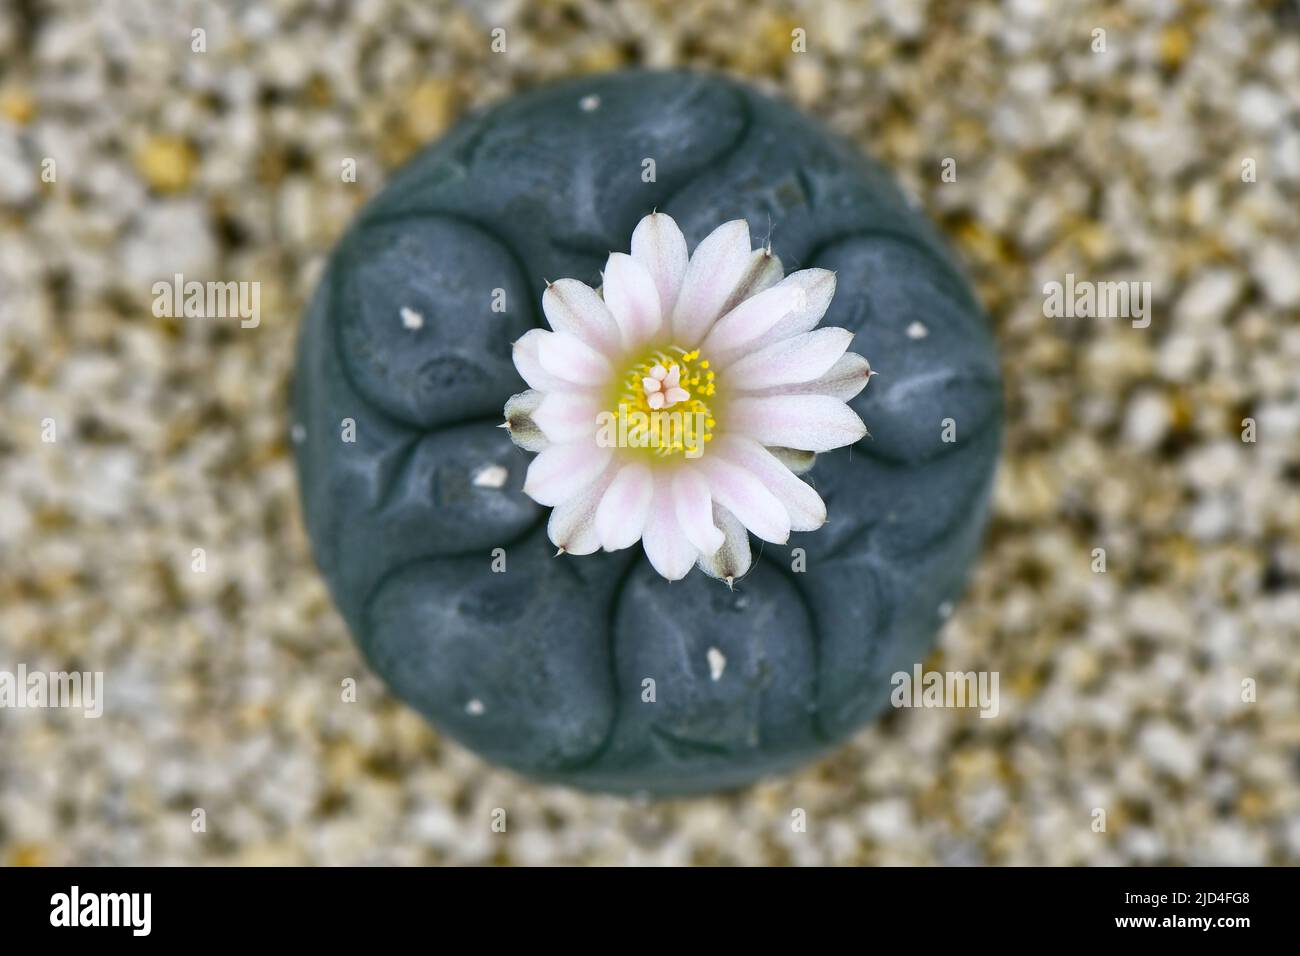 Lophophora williamsii or Peyote with pale pink blossom flower on pumice stone background. Stock Photo